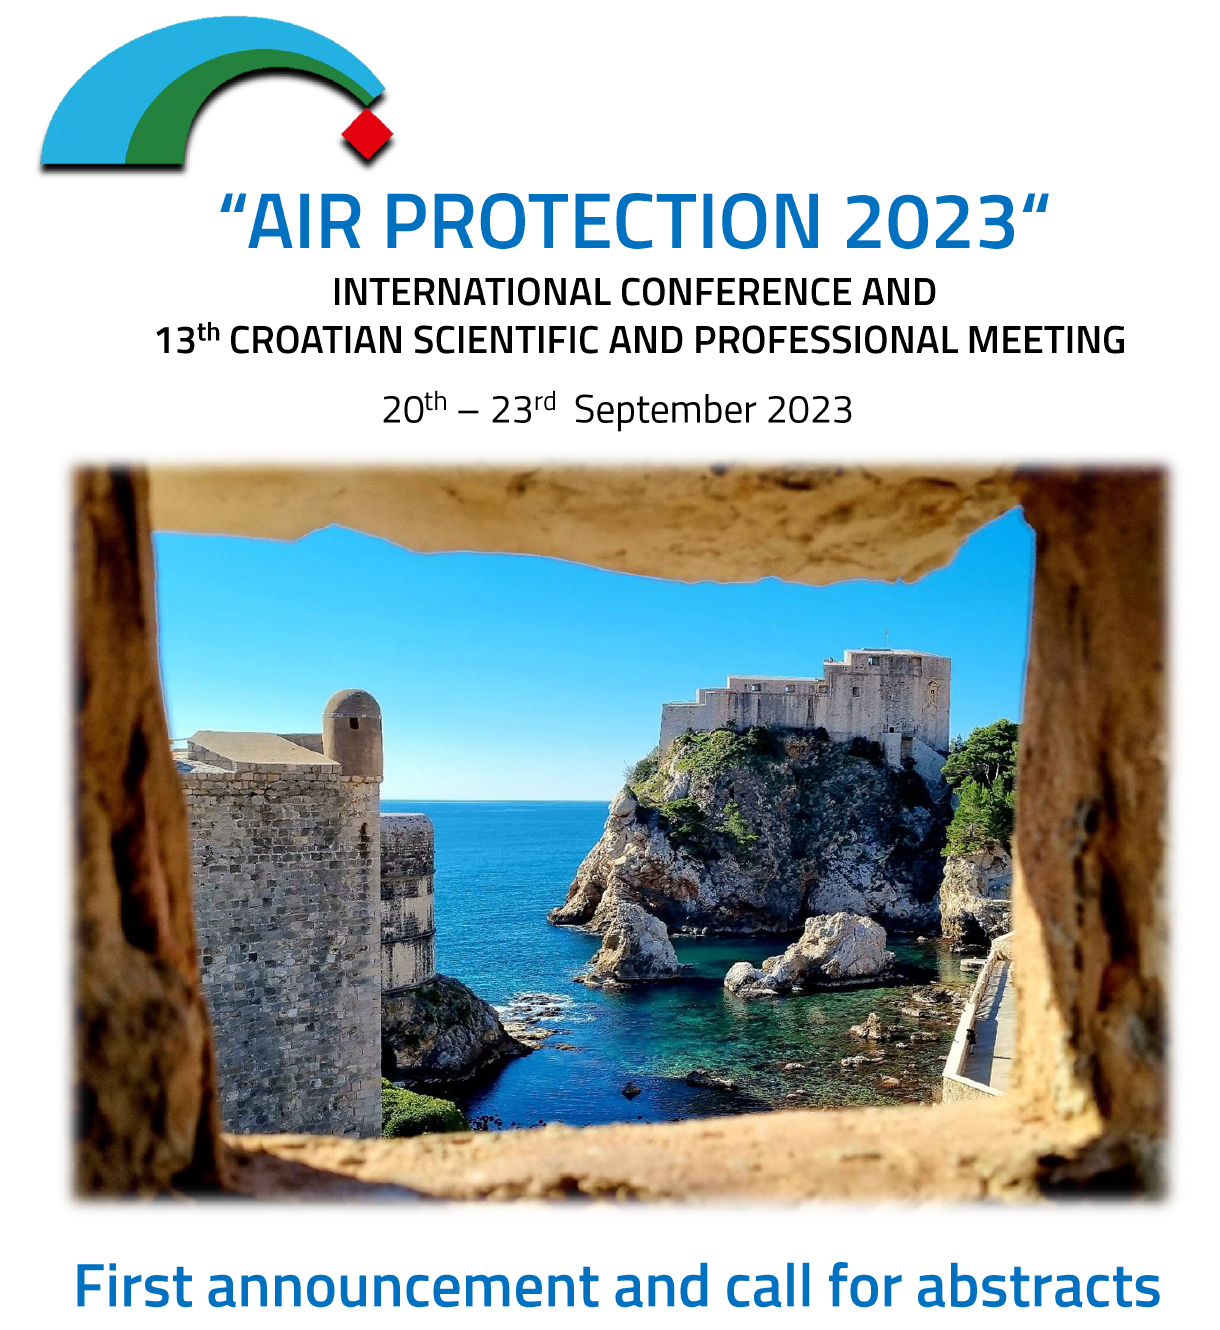 Air Protection 2023 Conference Flyer. The event will be held between the 20-23rd of September in Dubrovnik, Croatia. 